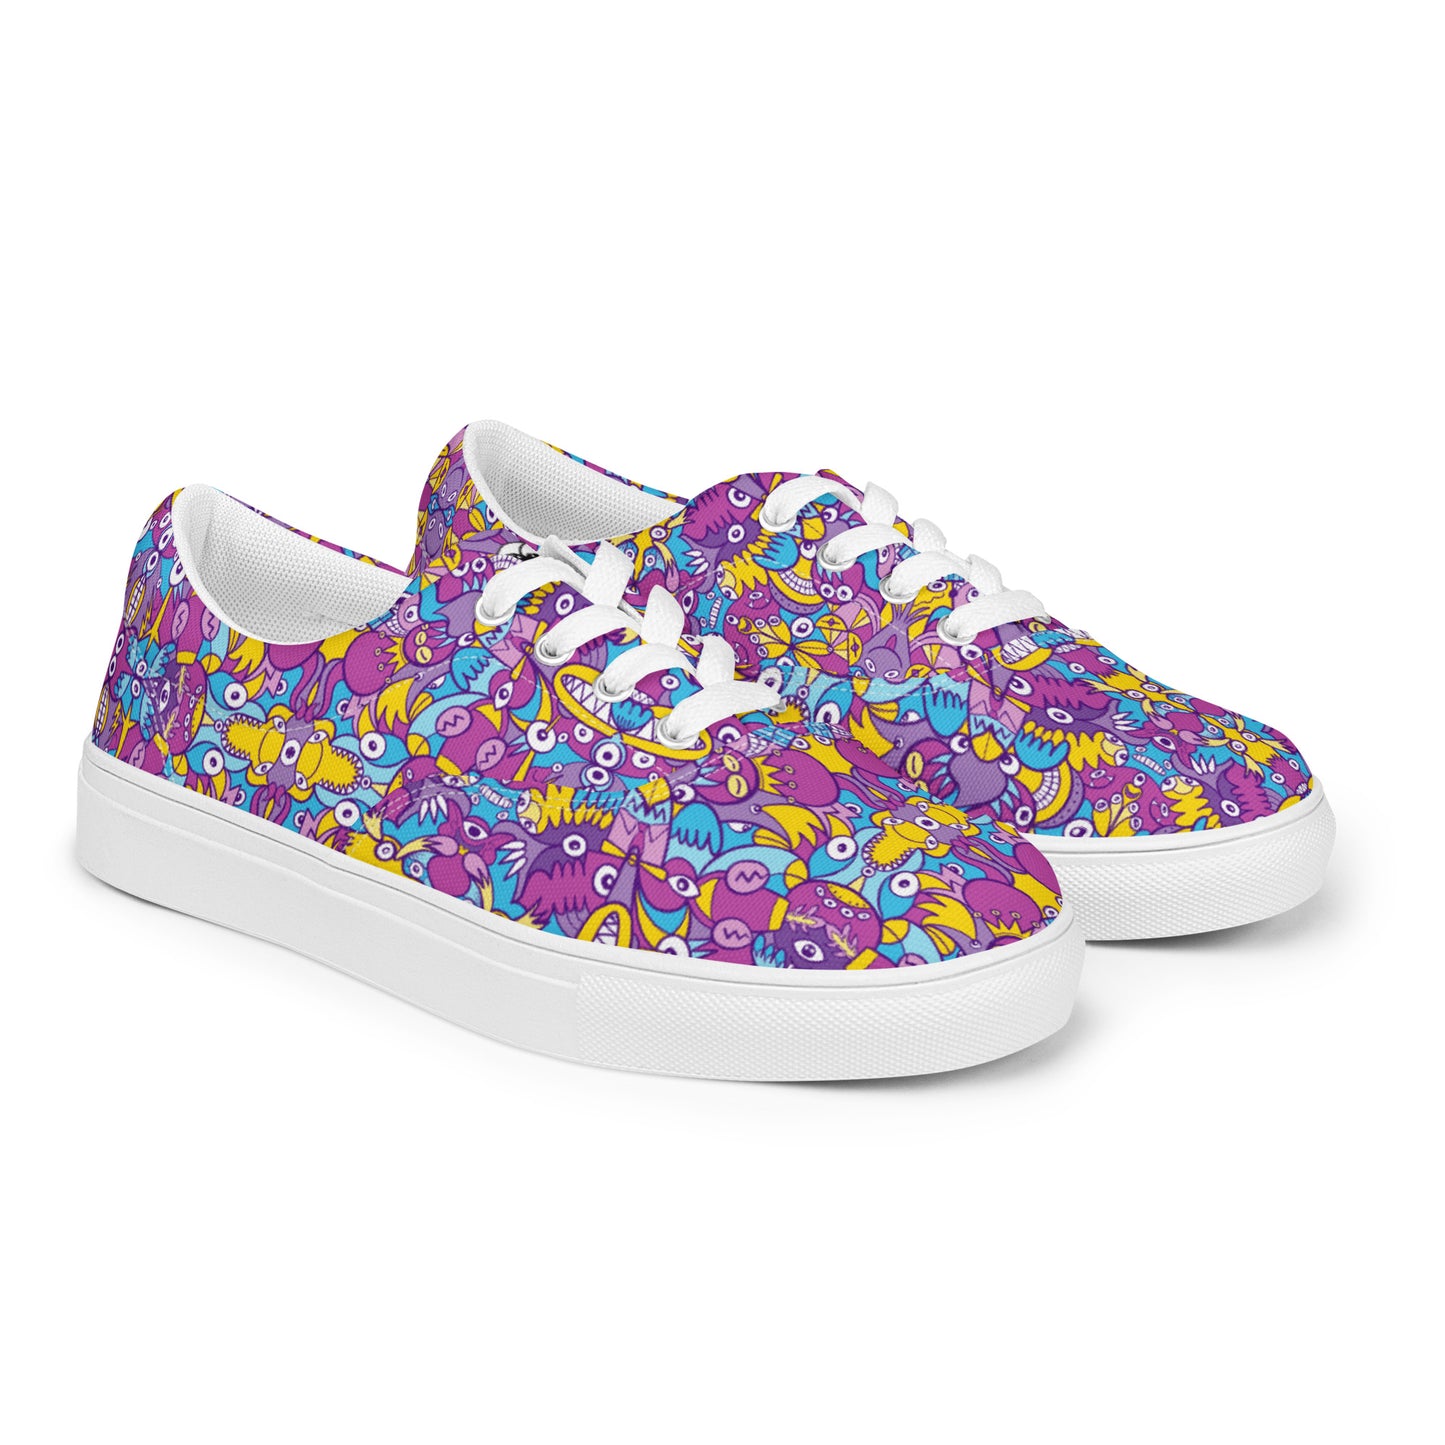 Doodle art compulsion is out of control Women’s lace-up canvas shoes. Overview